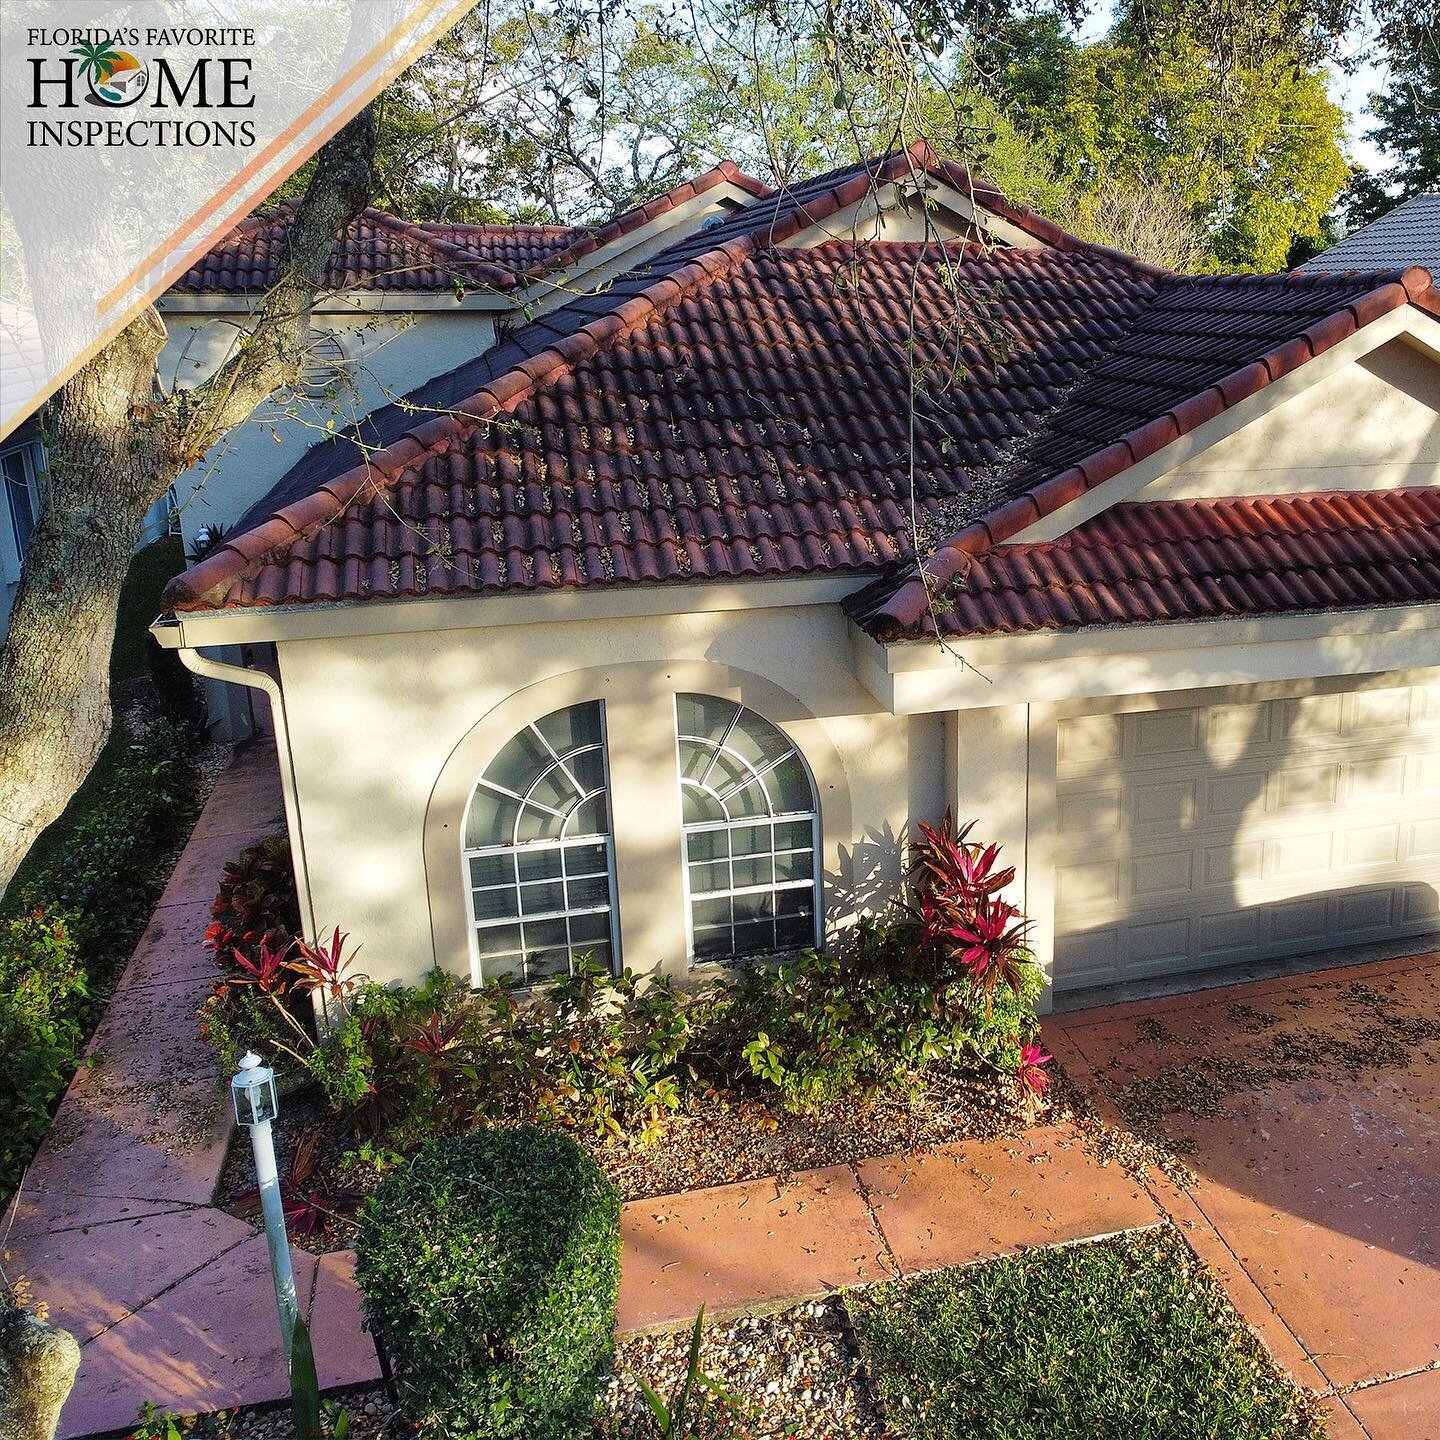 Recently inspected home in Coral Springs, Florida!